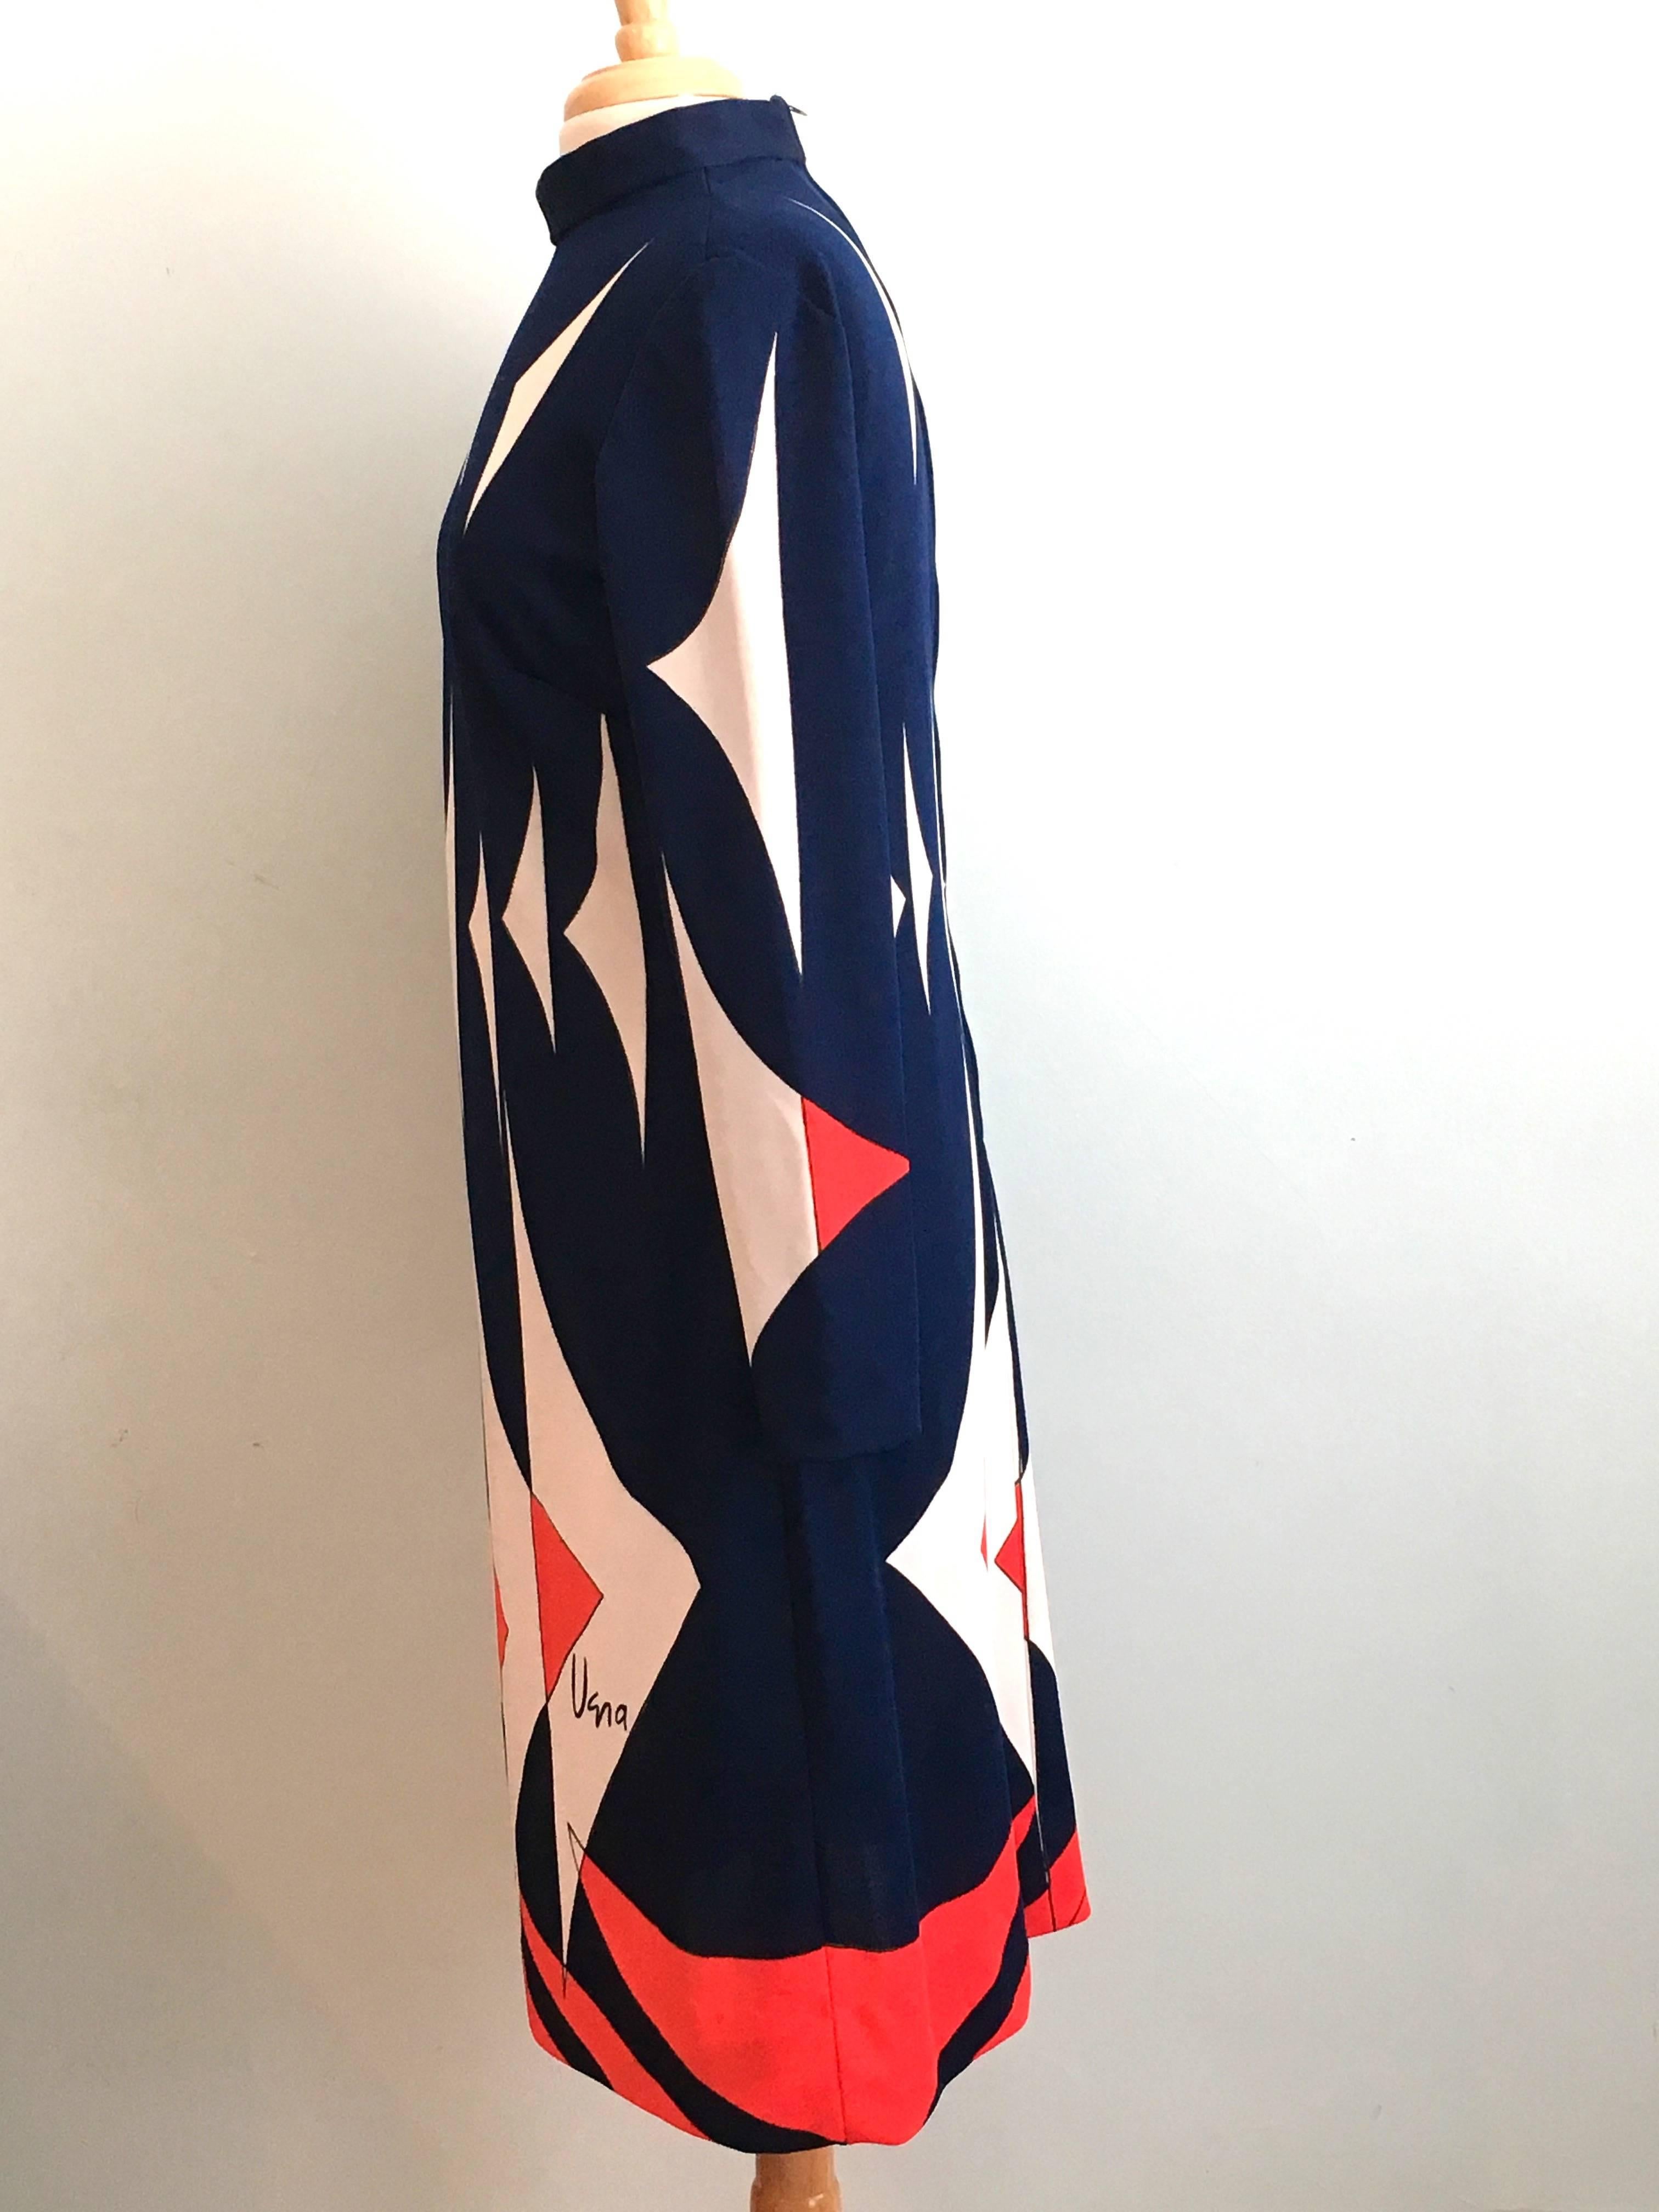 This is a fabulous 1970s graphic print dress from Vera Neumann. It features an abstract red, white and blue print. It is marked 'Vera' in the print on the front of the dress. The label is marked a size 16 but this is vintage sizing. It is more like